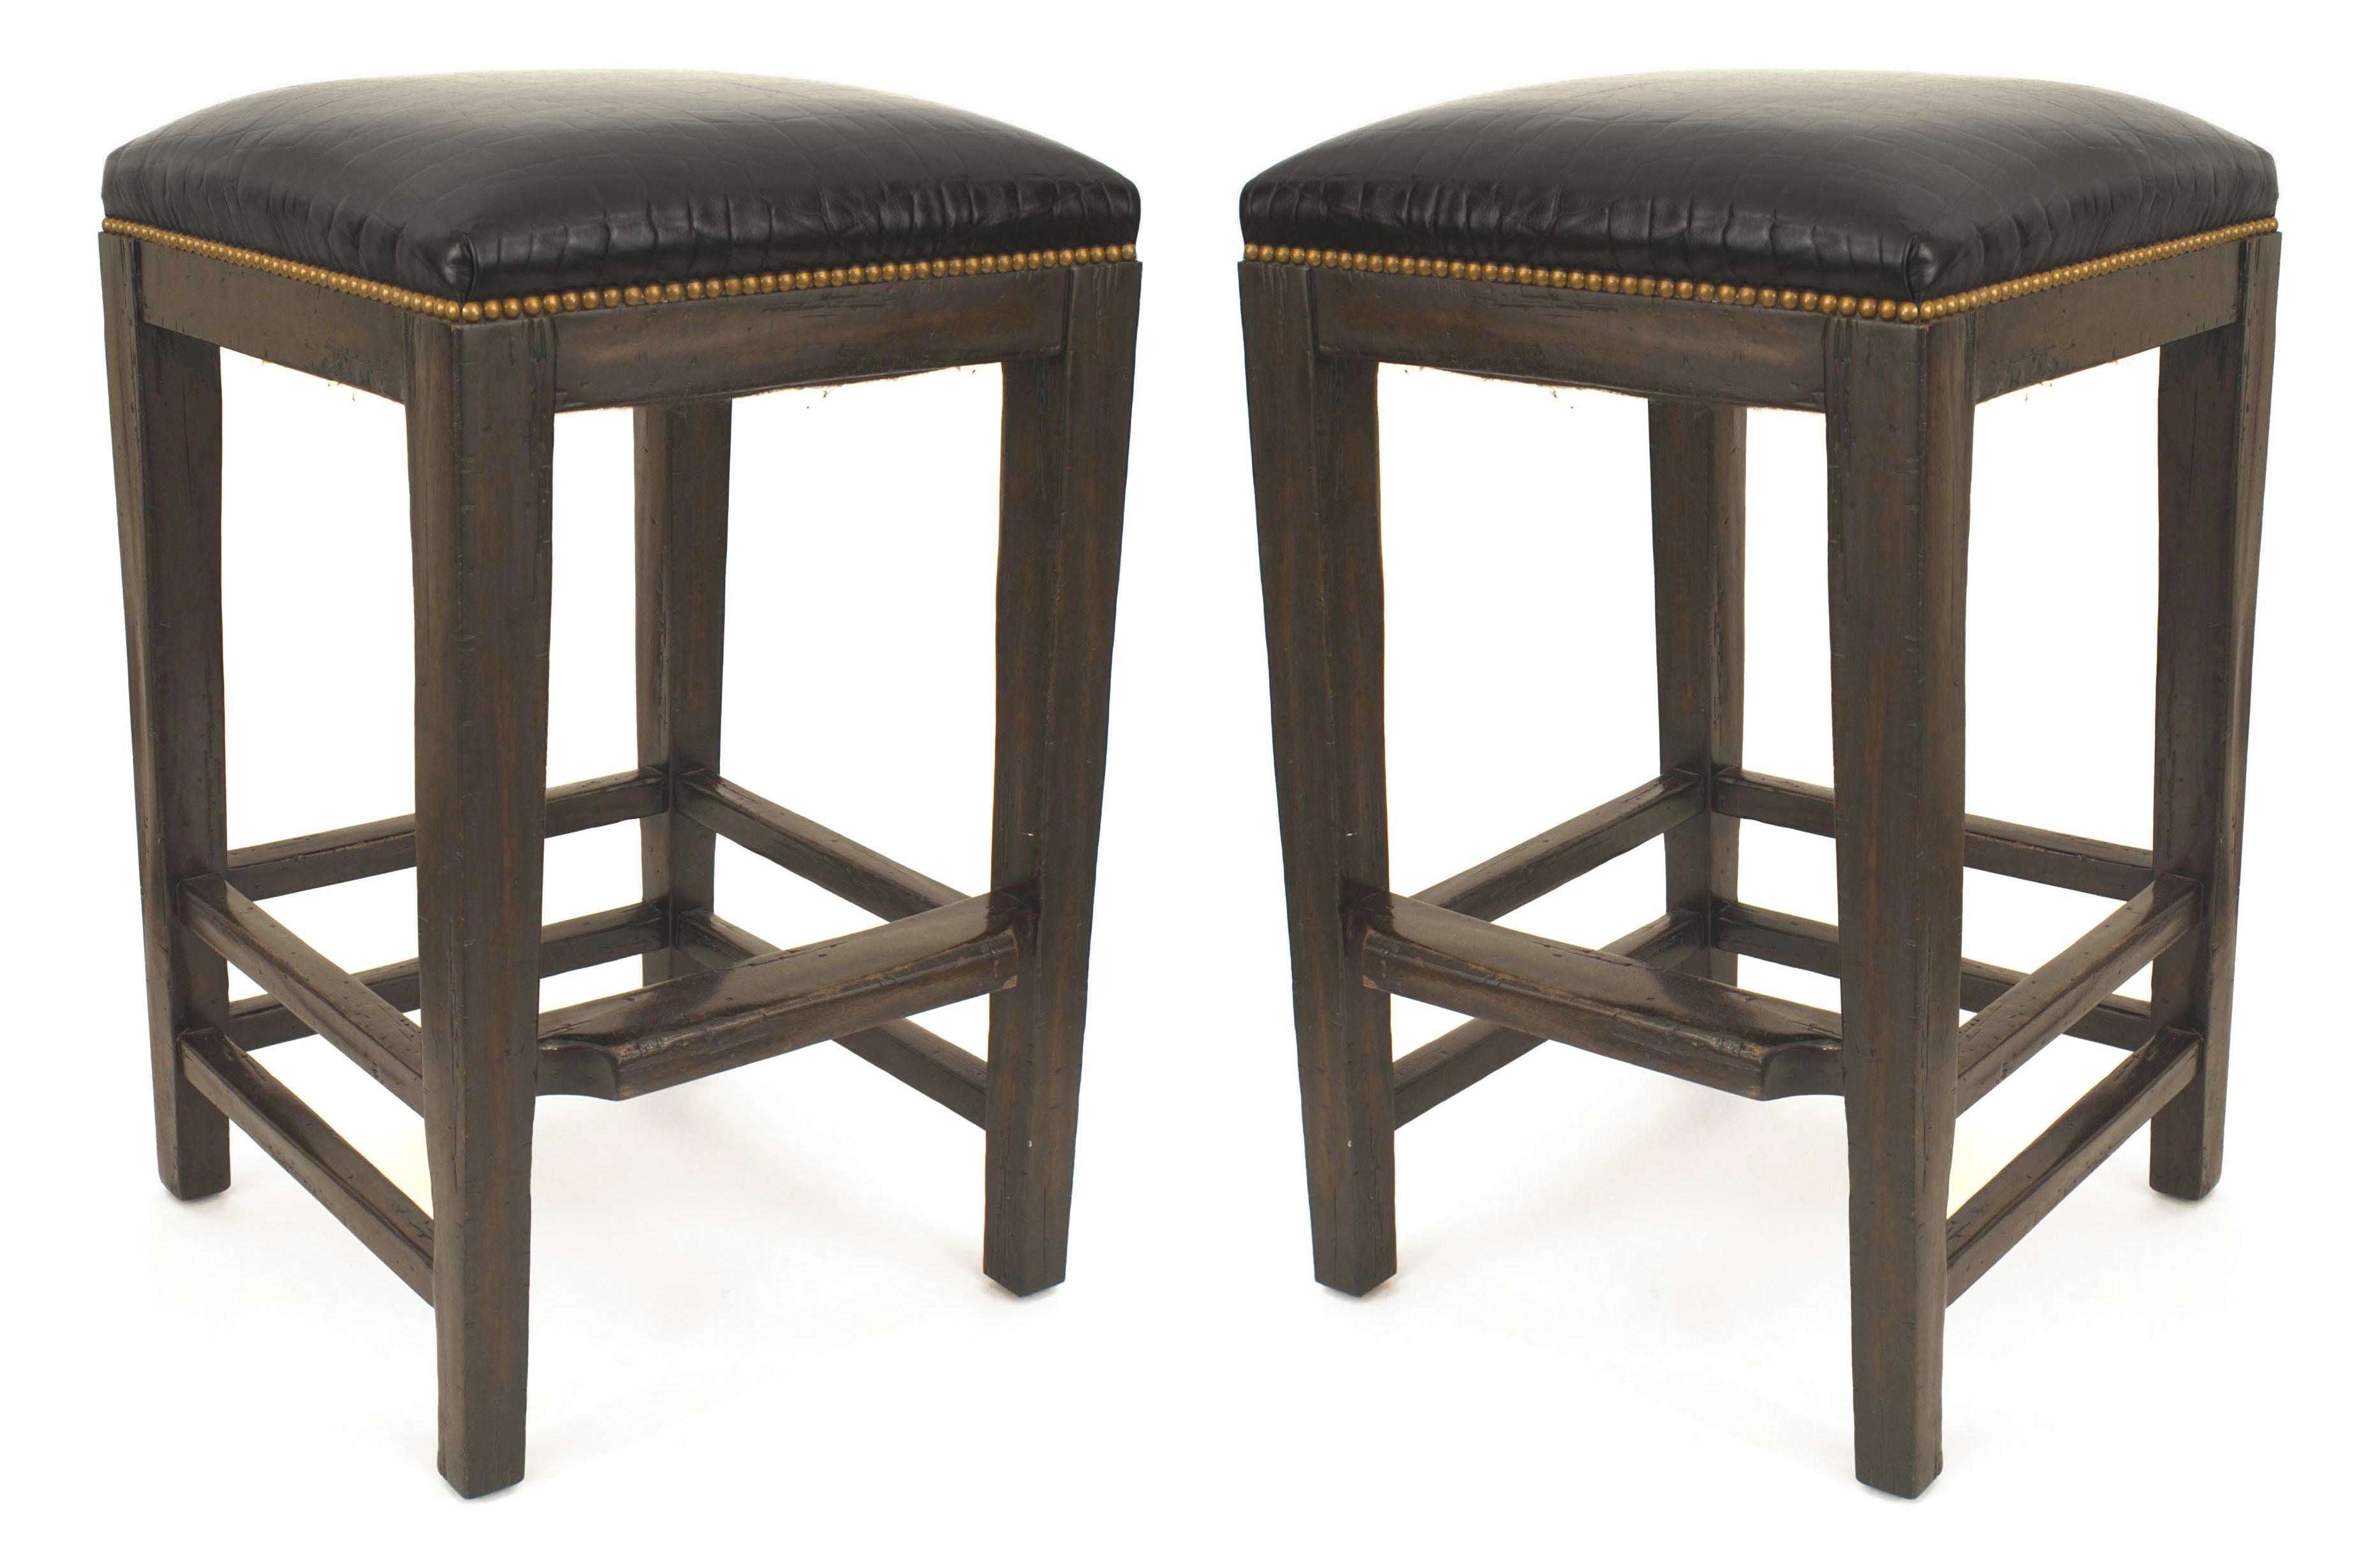 Modern Contemporary Post-War Leather Bar Stools For Sale